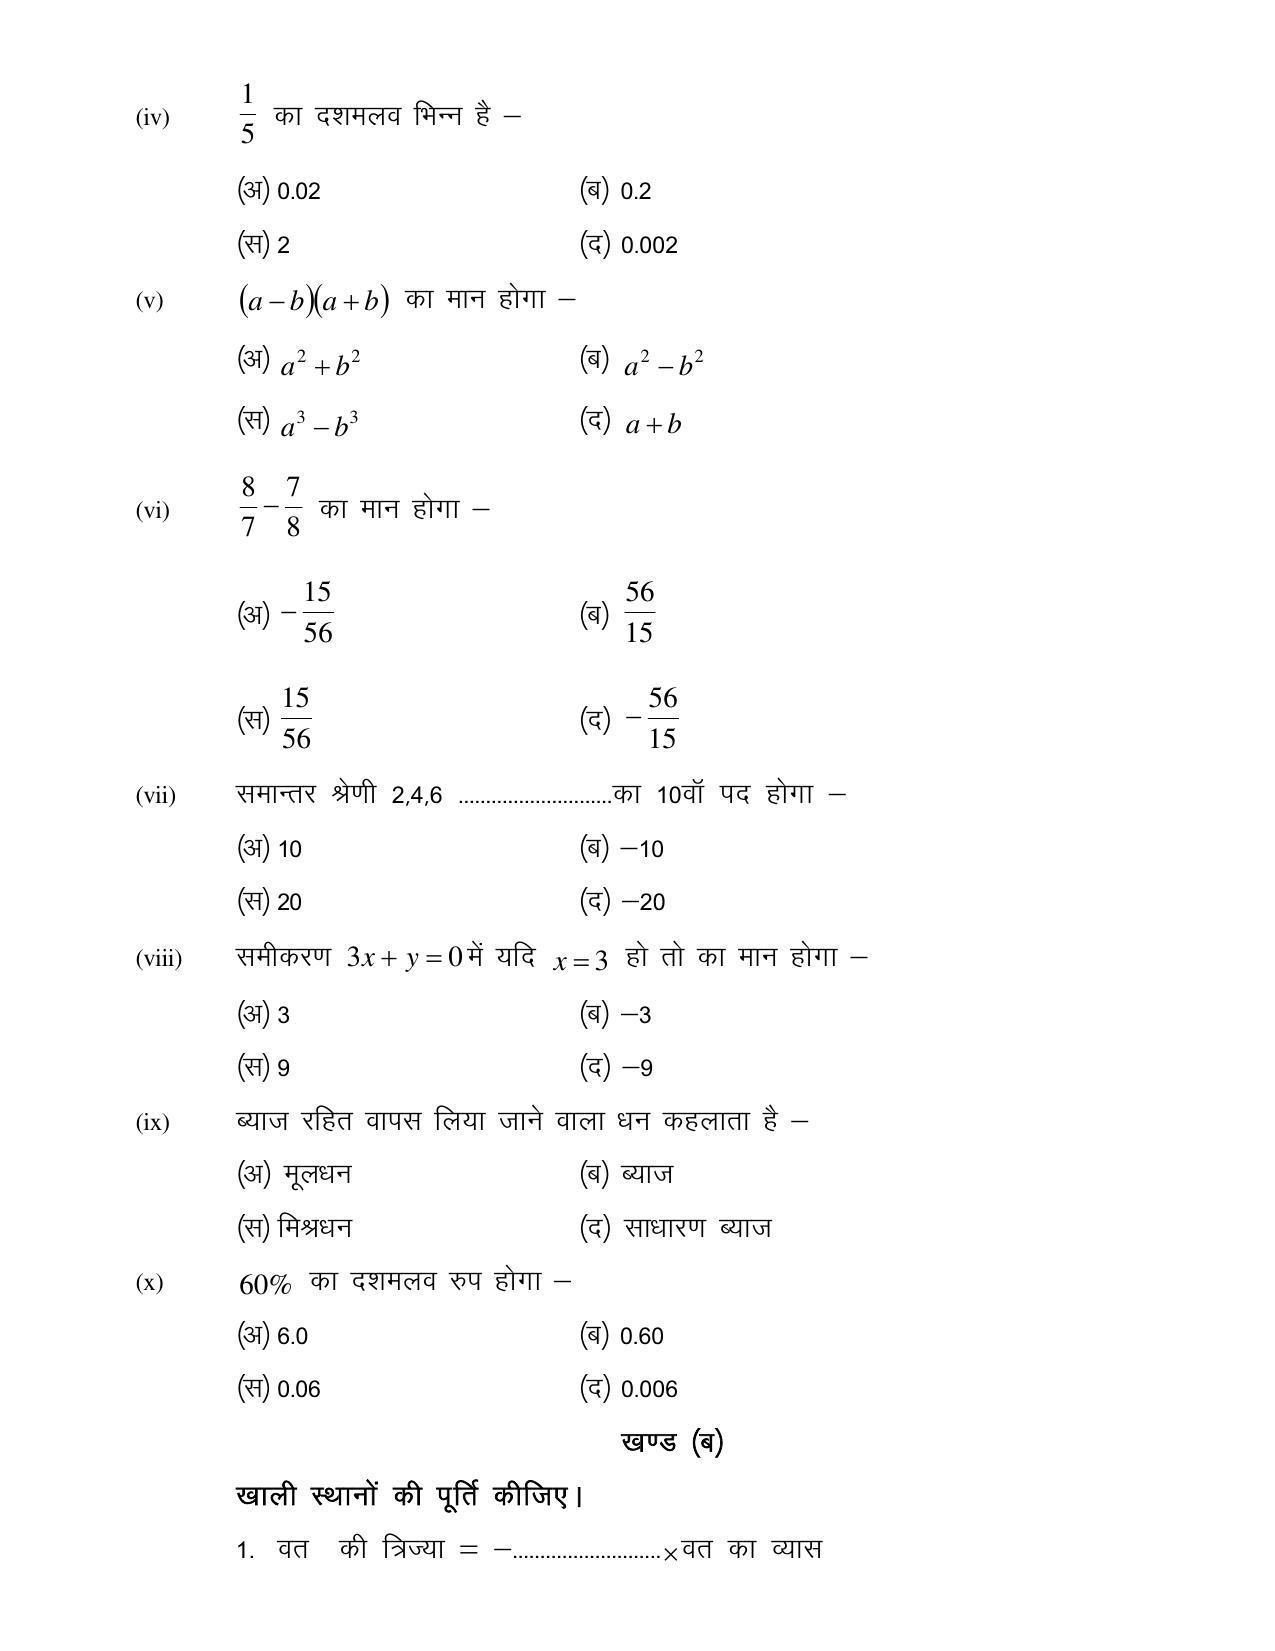 CGSOS Class 10th Model Question Paper - Mathematics - IV - Page 2